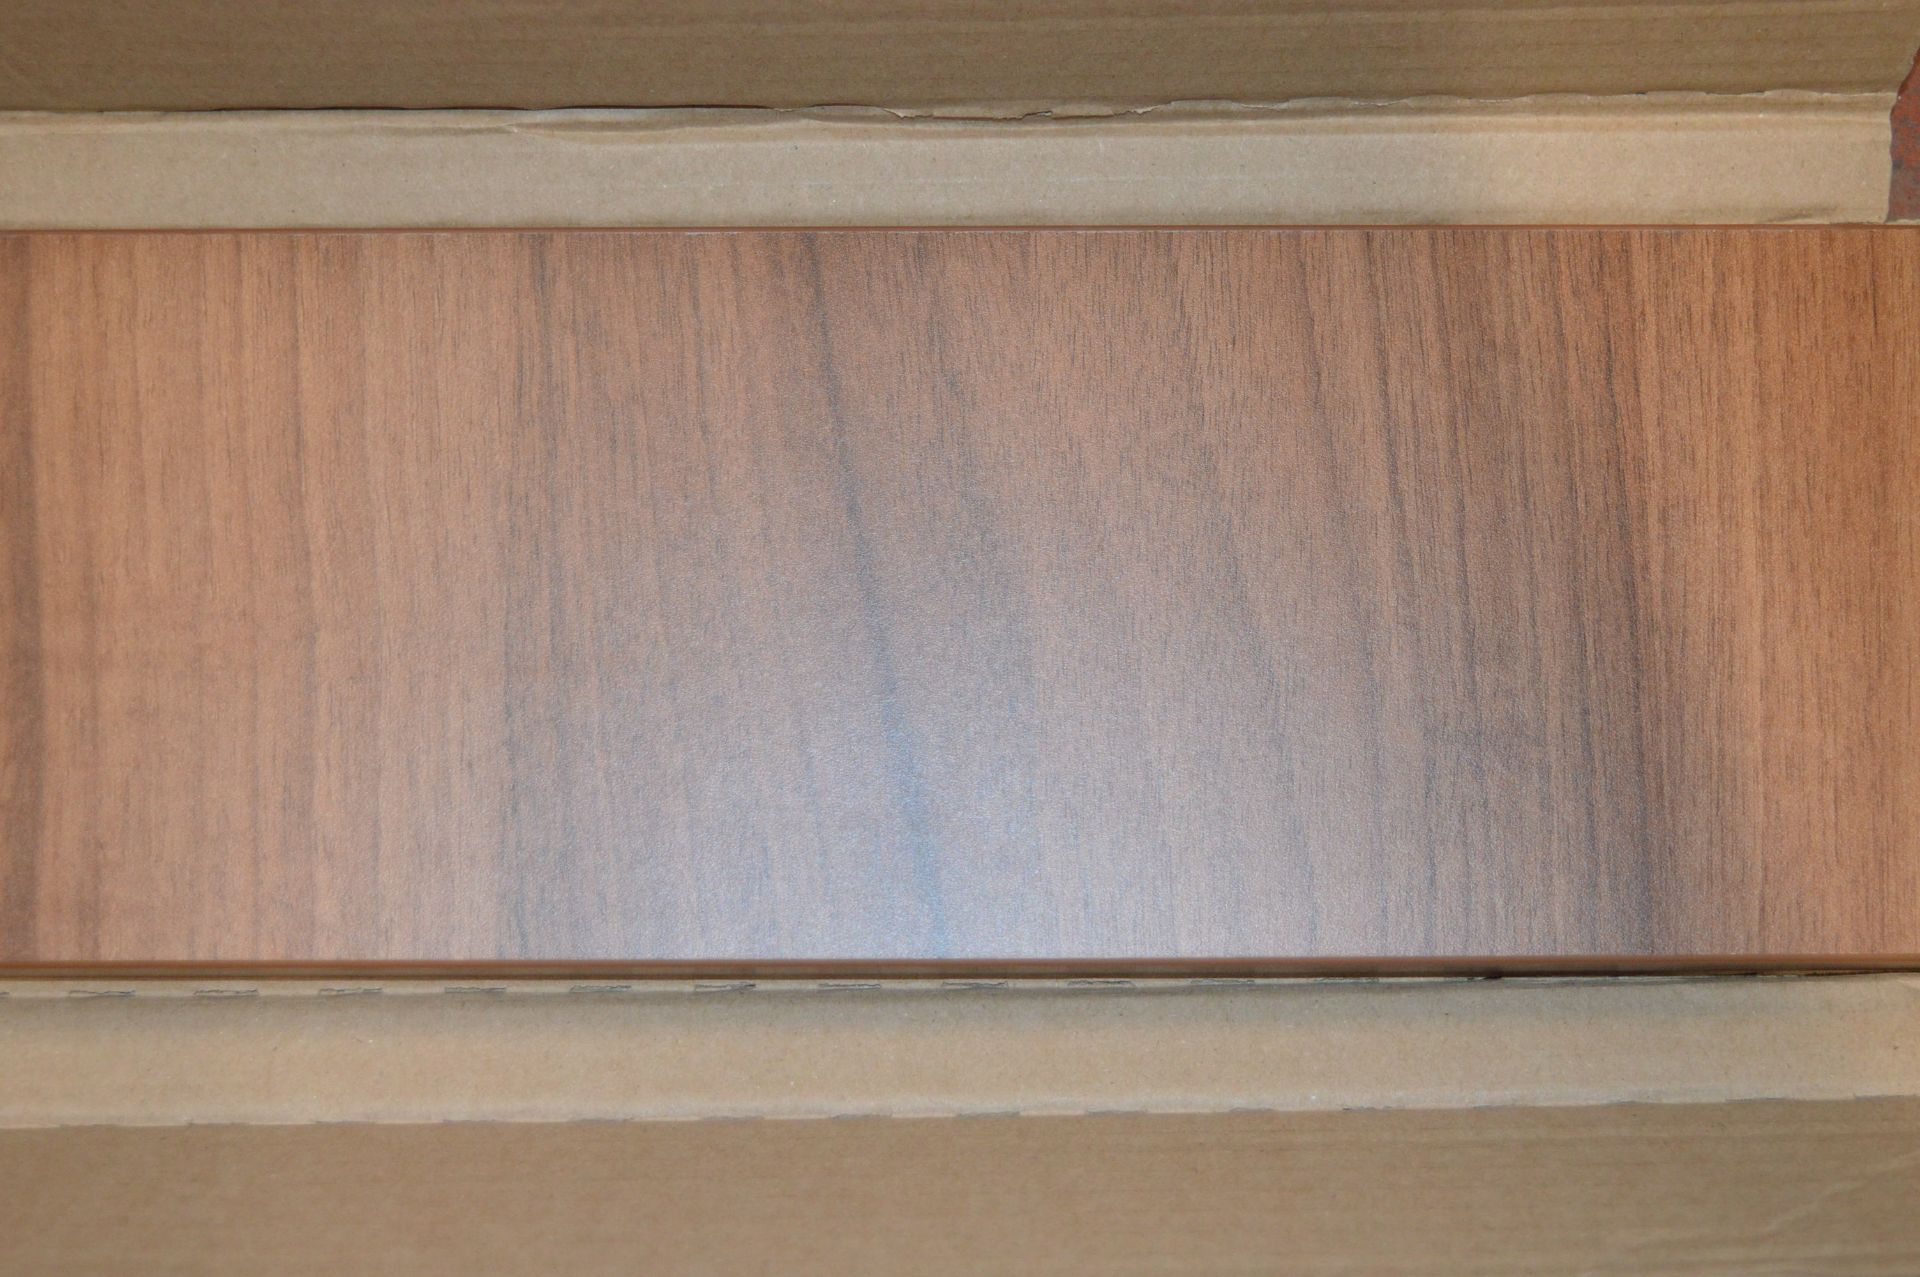 Two Walnut Frontal Drawer Panels 124x496mm - Image 2 of 2